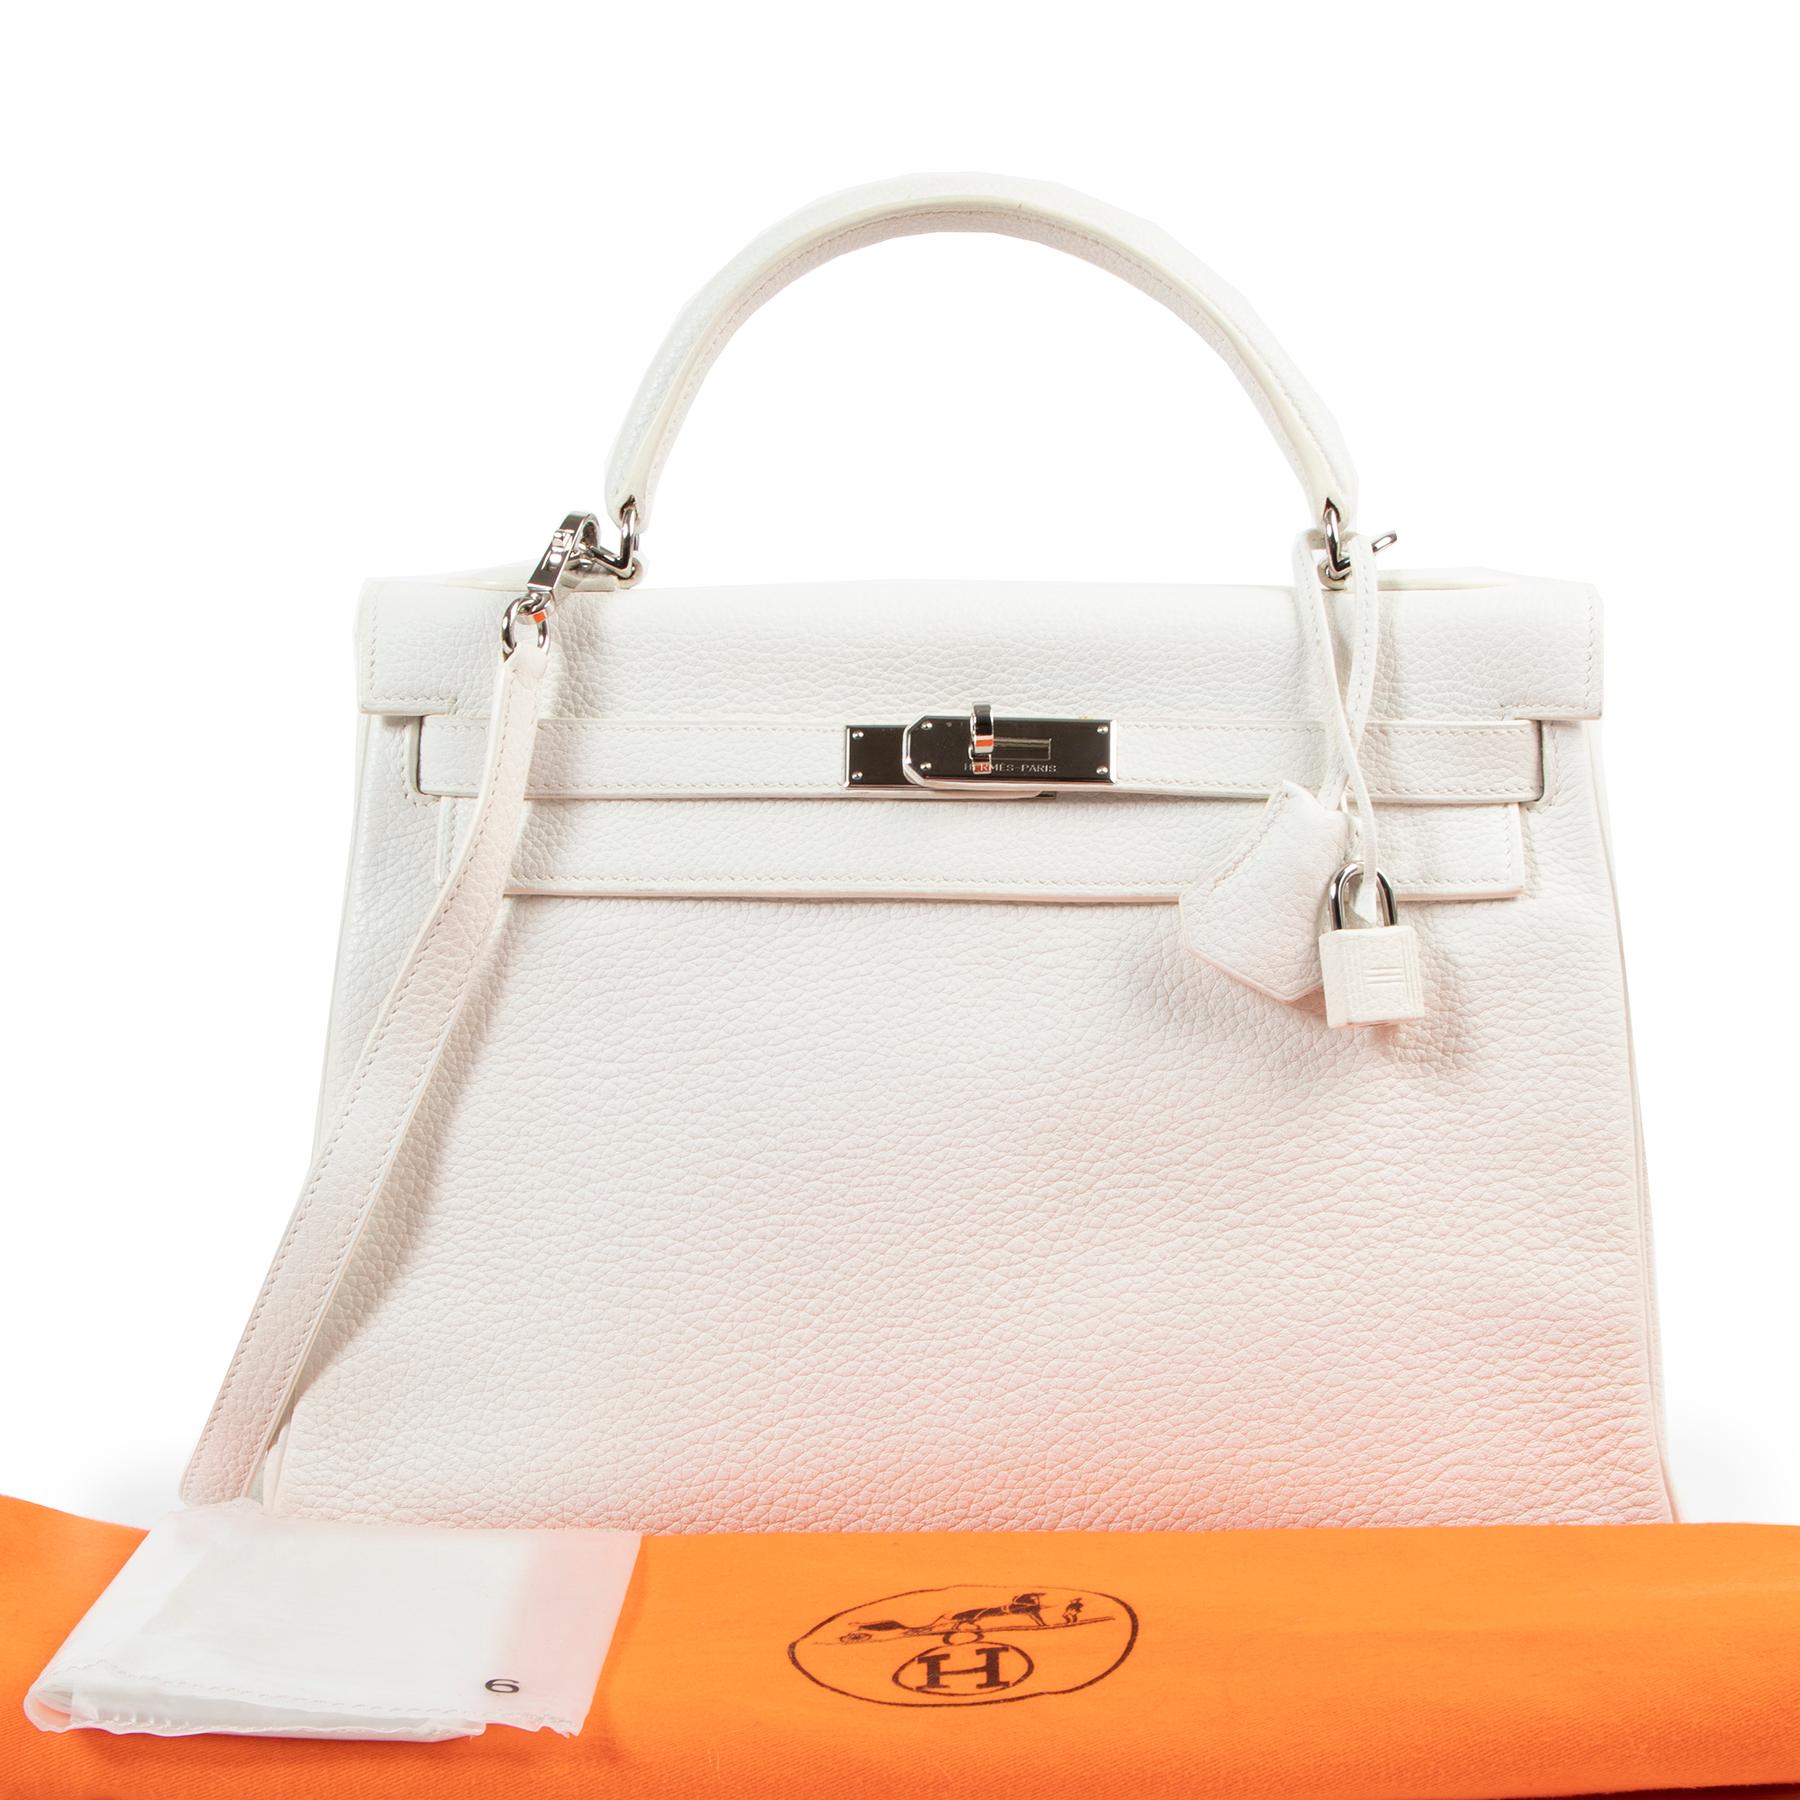 Hermès Kelly 32cm Wite/ Blanc PHW

The very rare Hermès Kelly stands for timeless luxury and elegance, made popular by Princess Grace Kelly. 
This Kelly comes in the most-wanted 32cm size and in luxurious white leather, finished with palladium-toned